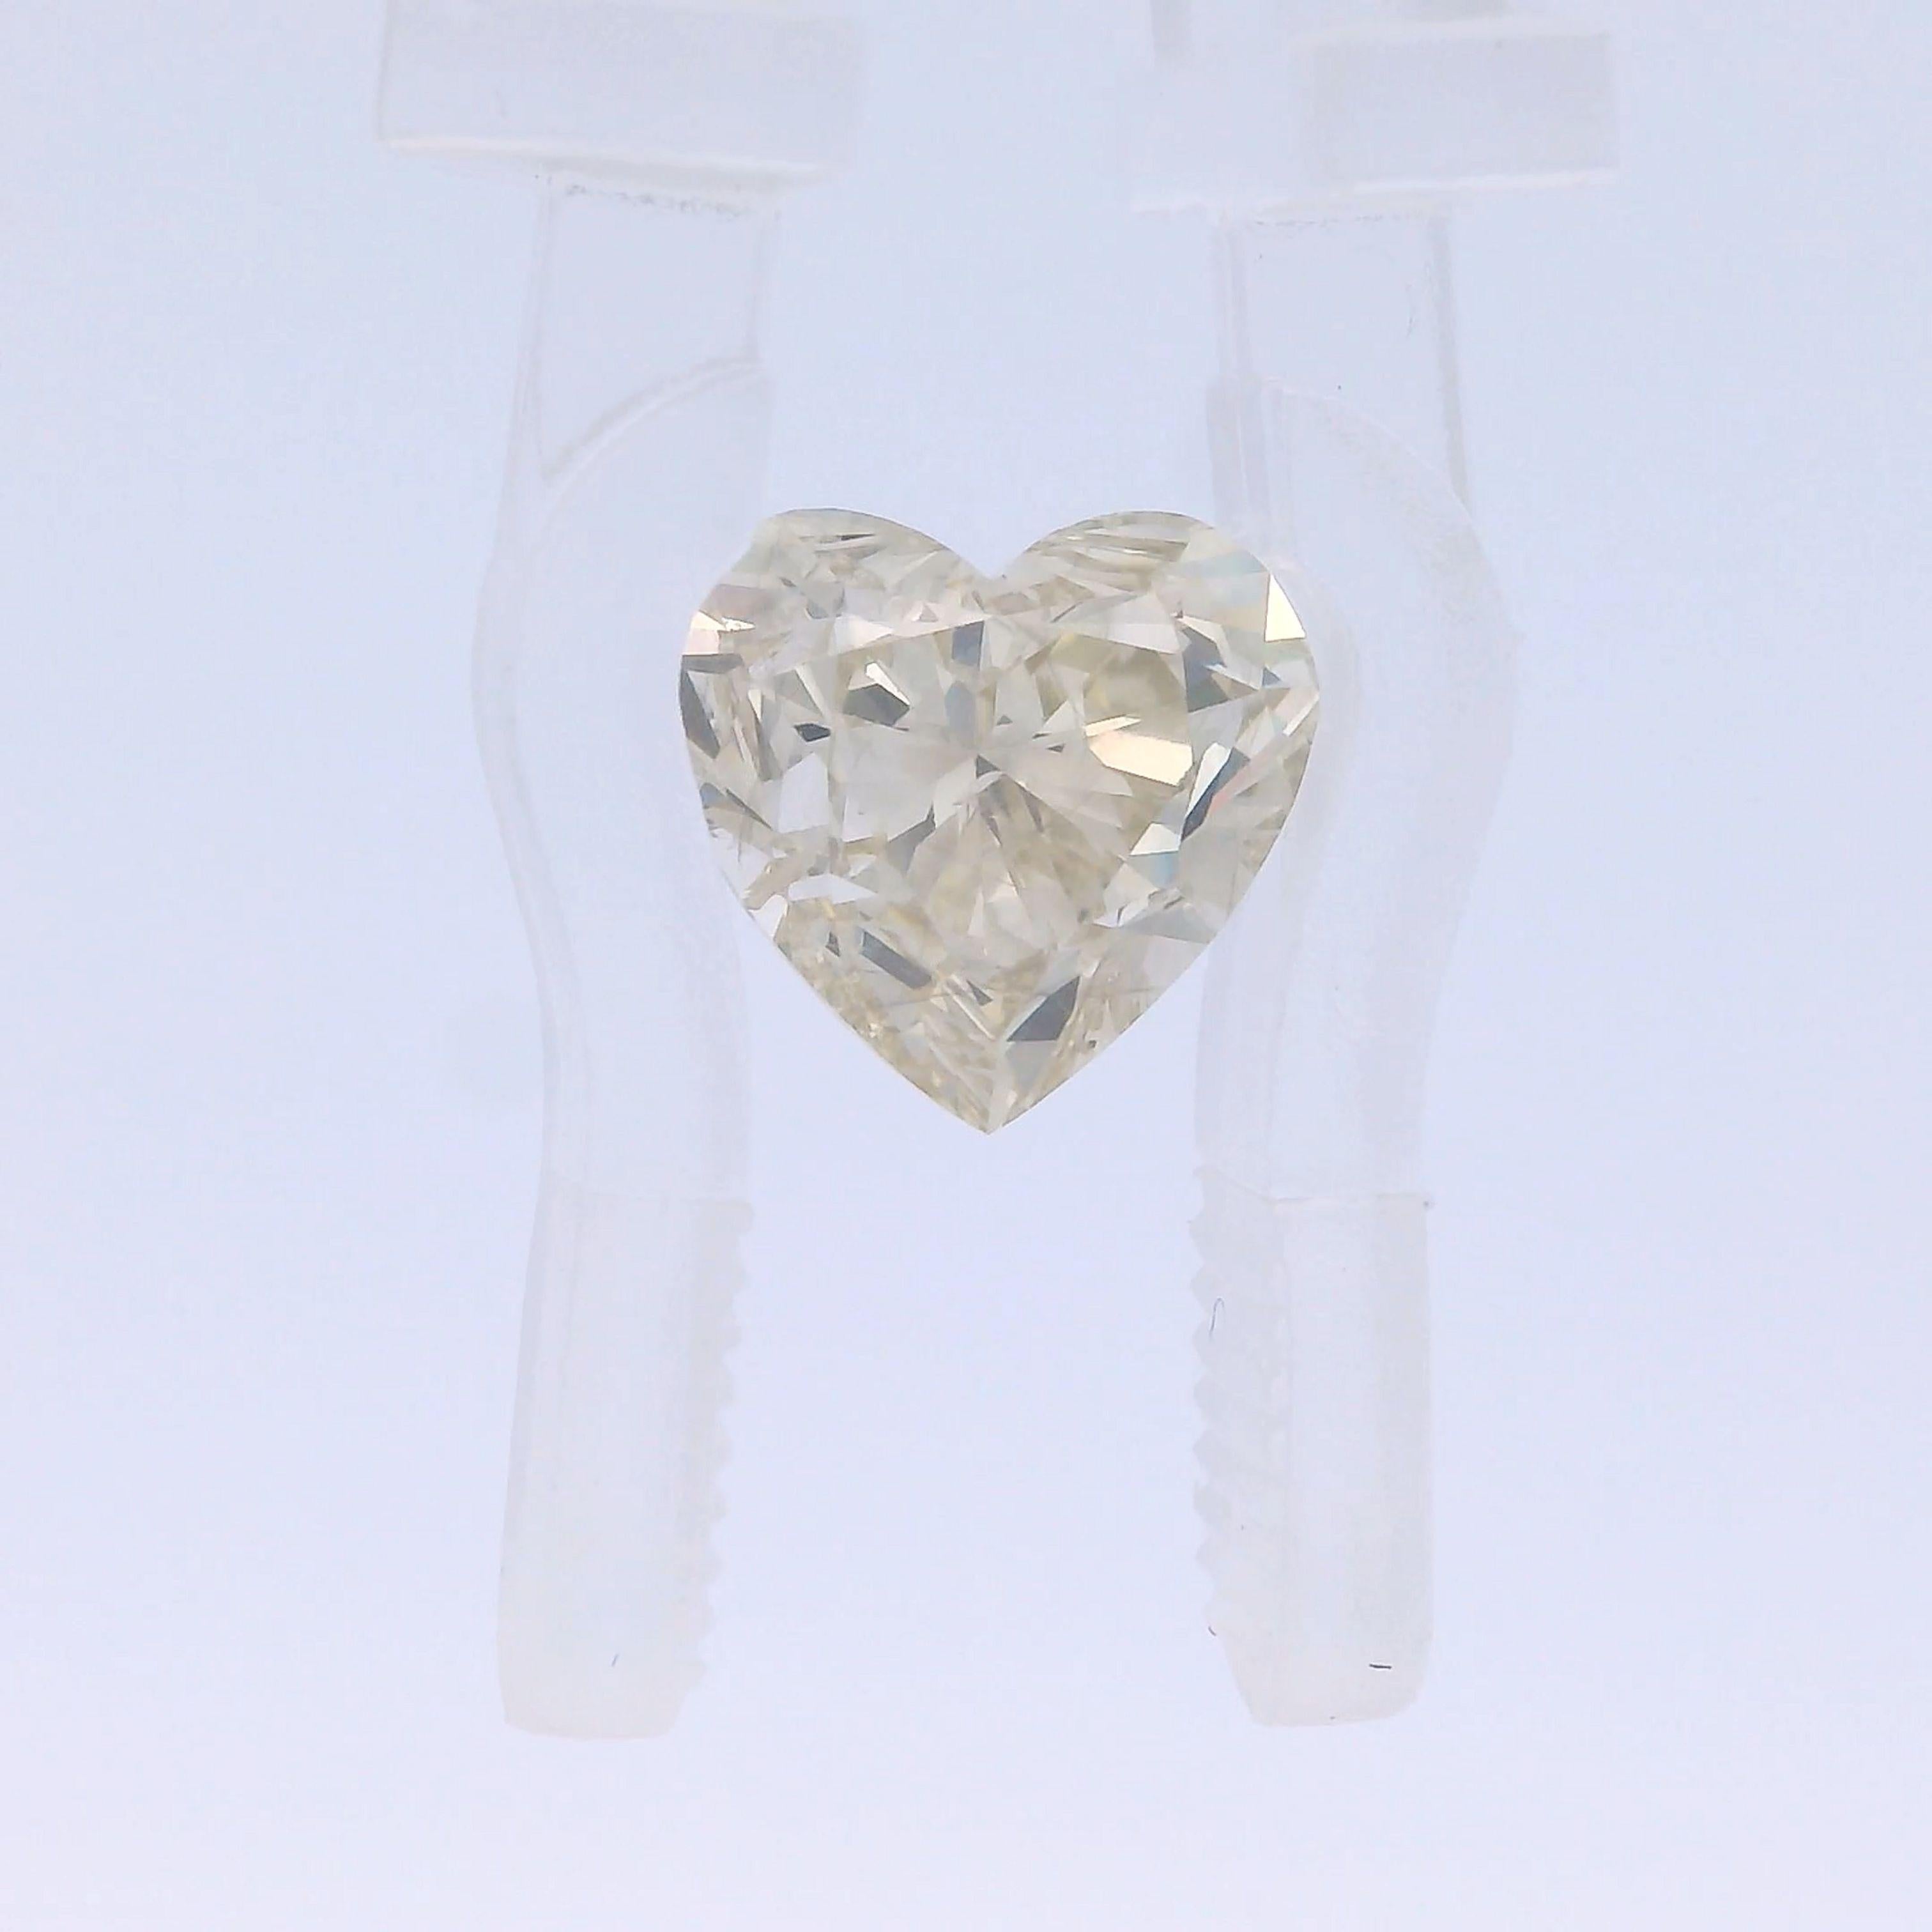 This exquisite 2.06 carat heart-shaped natural yellow diamond is a stunning example of nature's beauty. Expertly cut to perfection, it boasts exceptional clarity and a radiant yellow hue that captivates the eye.

Yellow diamonds are highly coveted